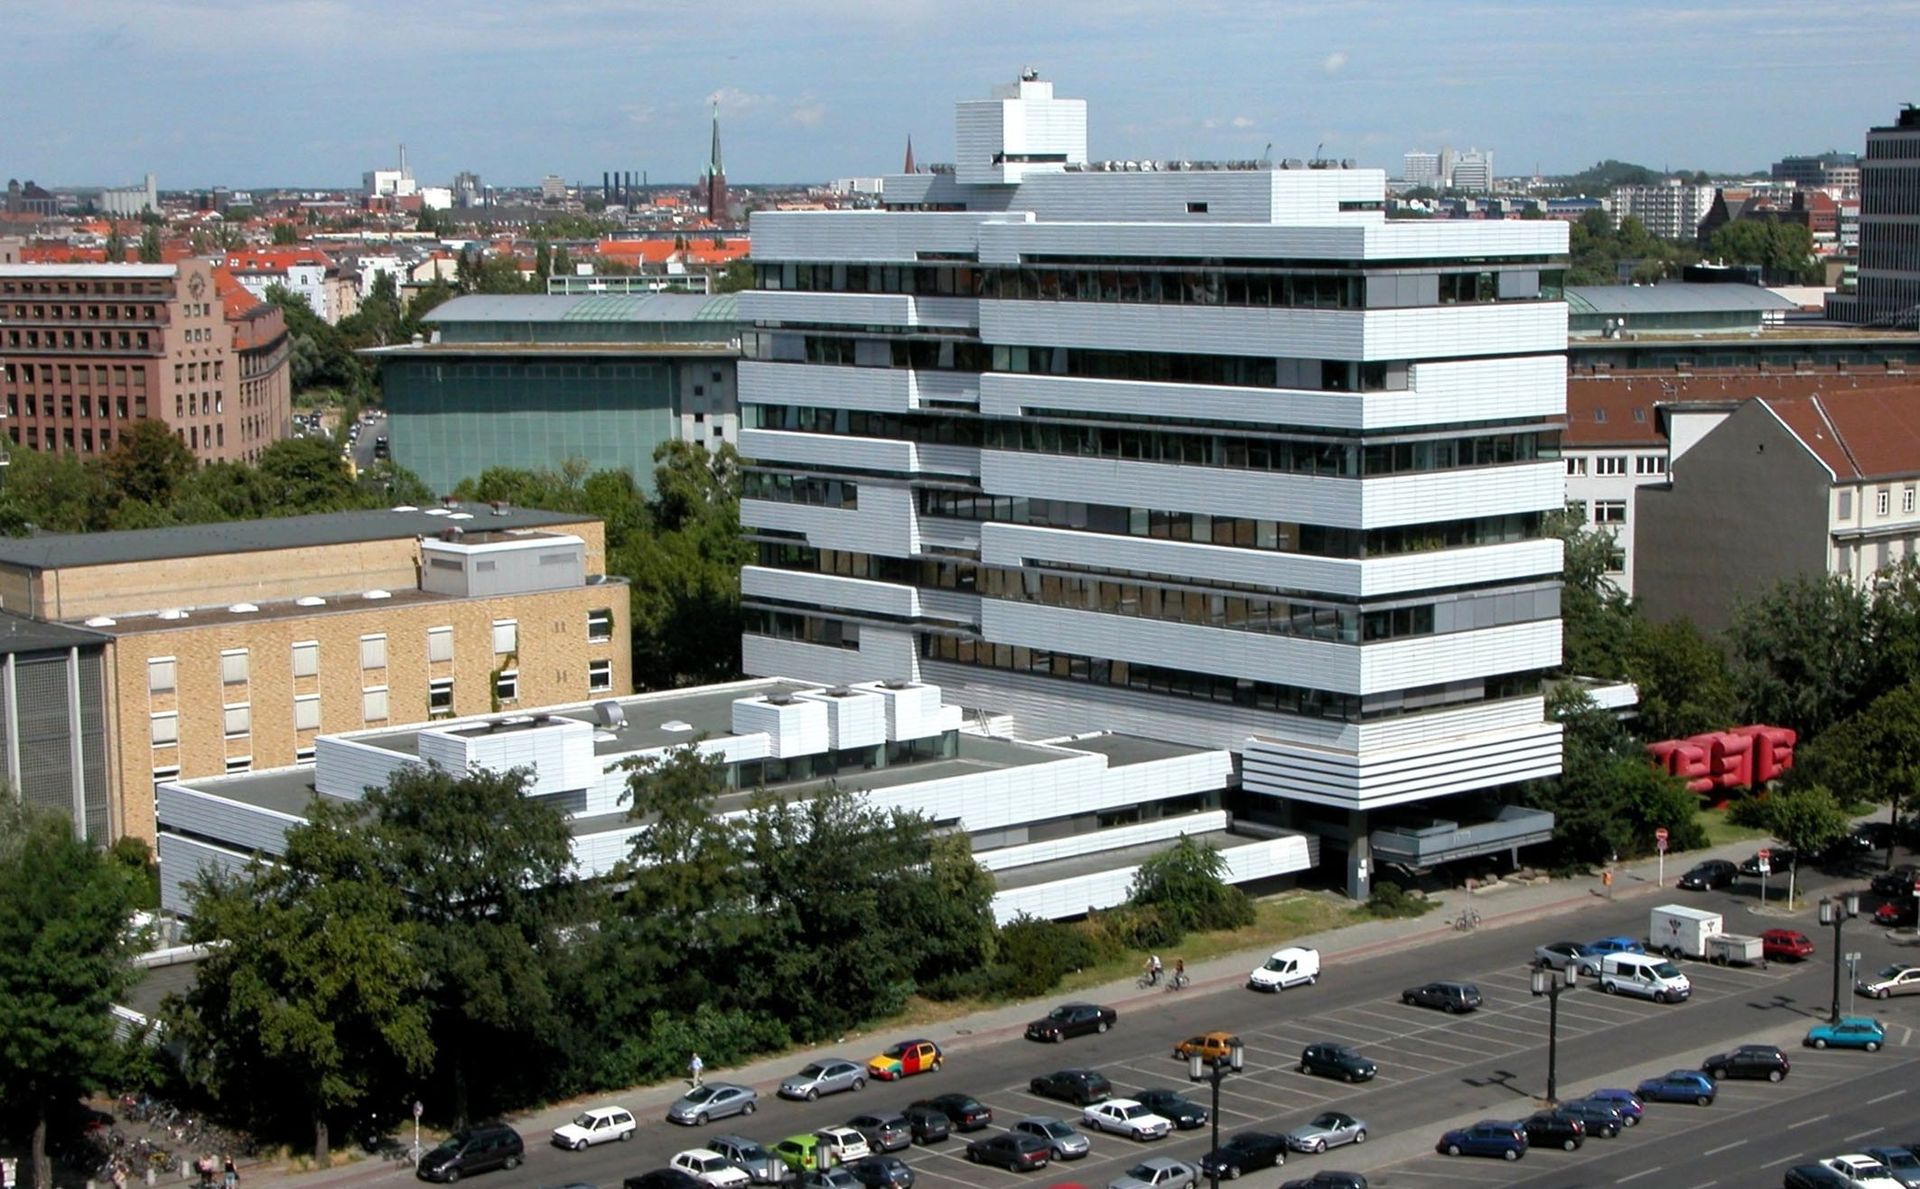 Picture illustrating the university